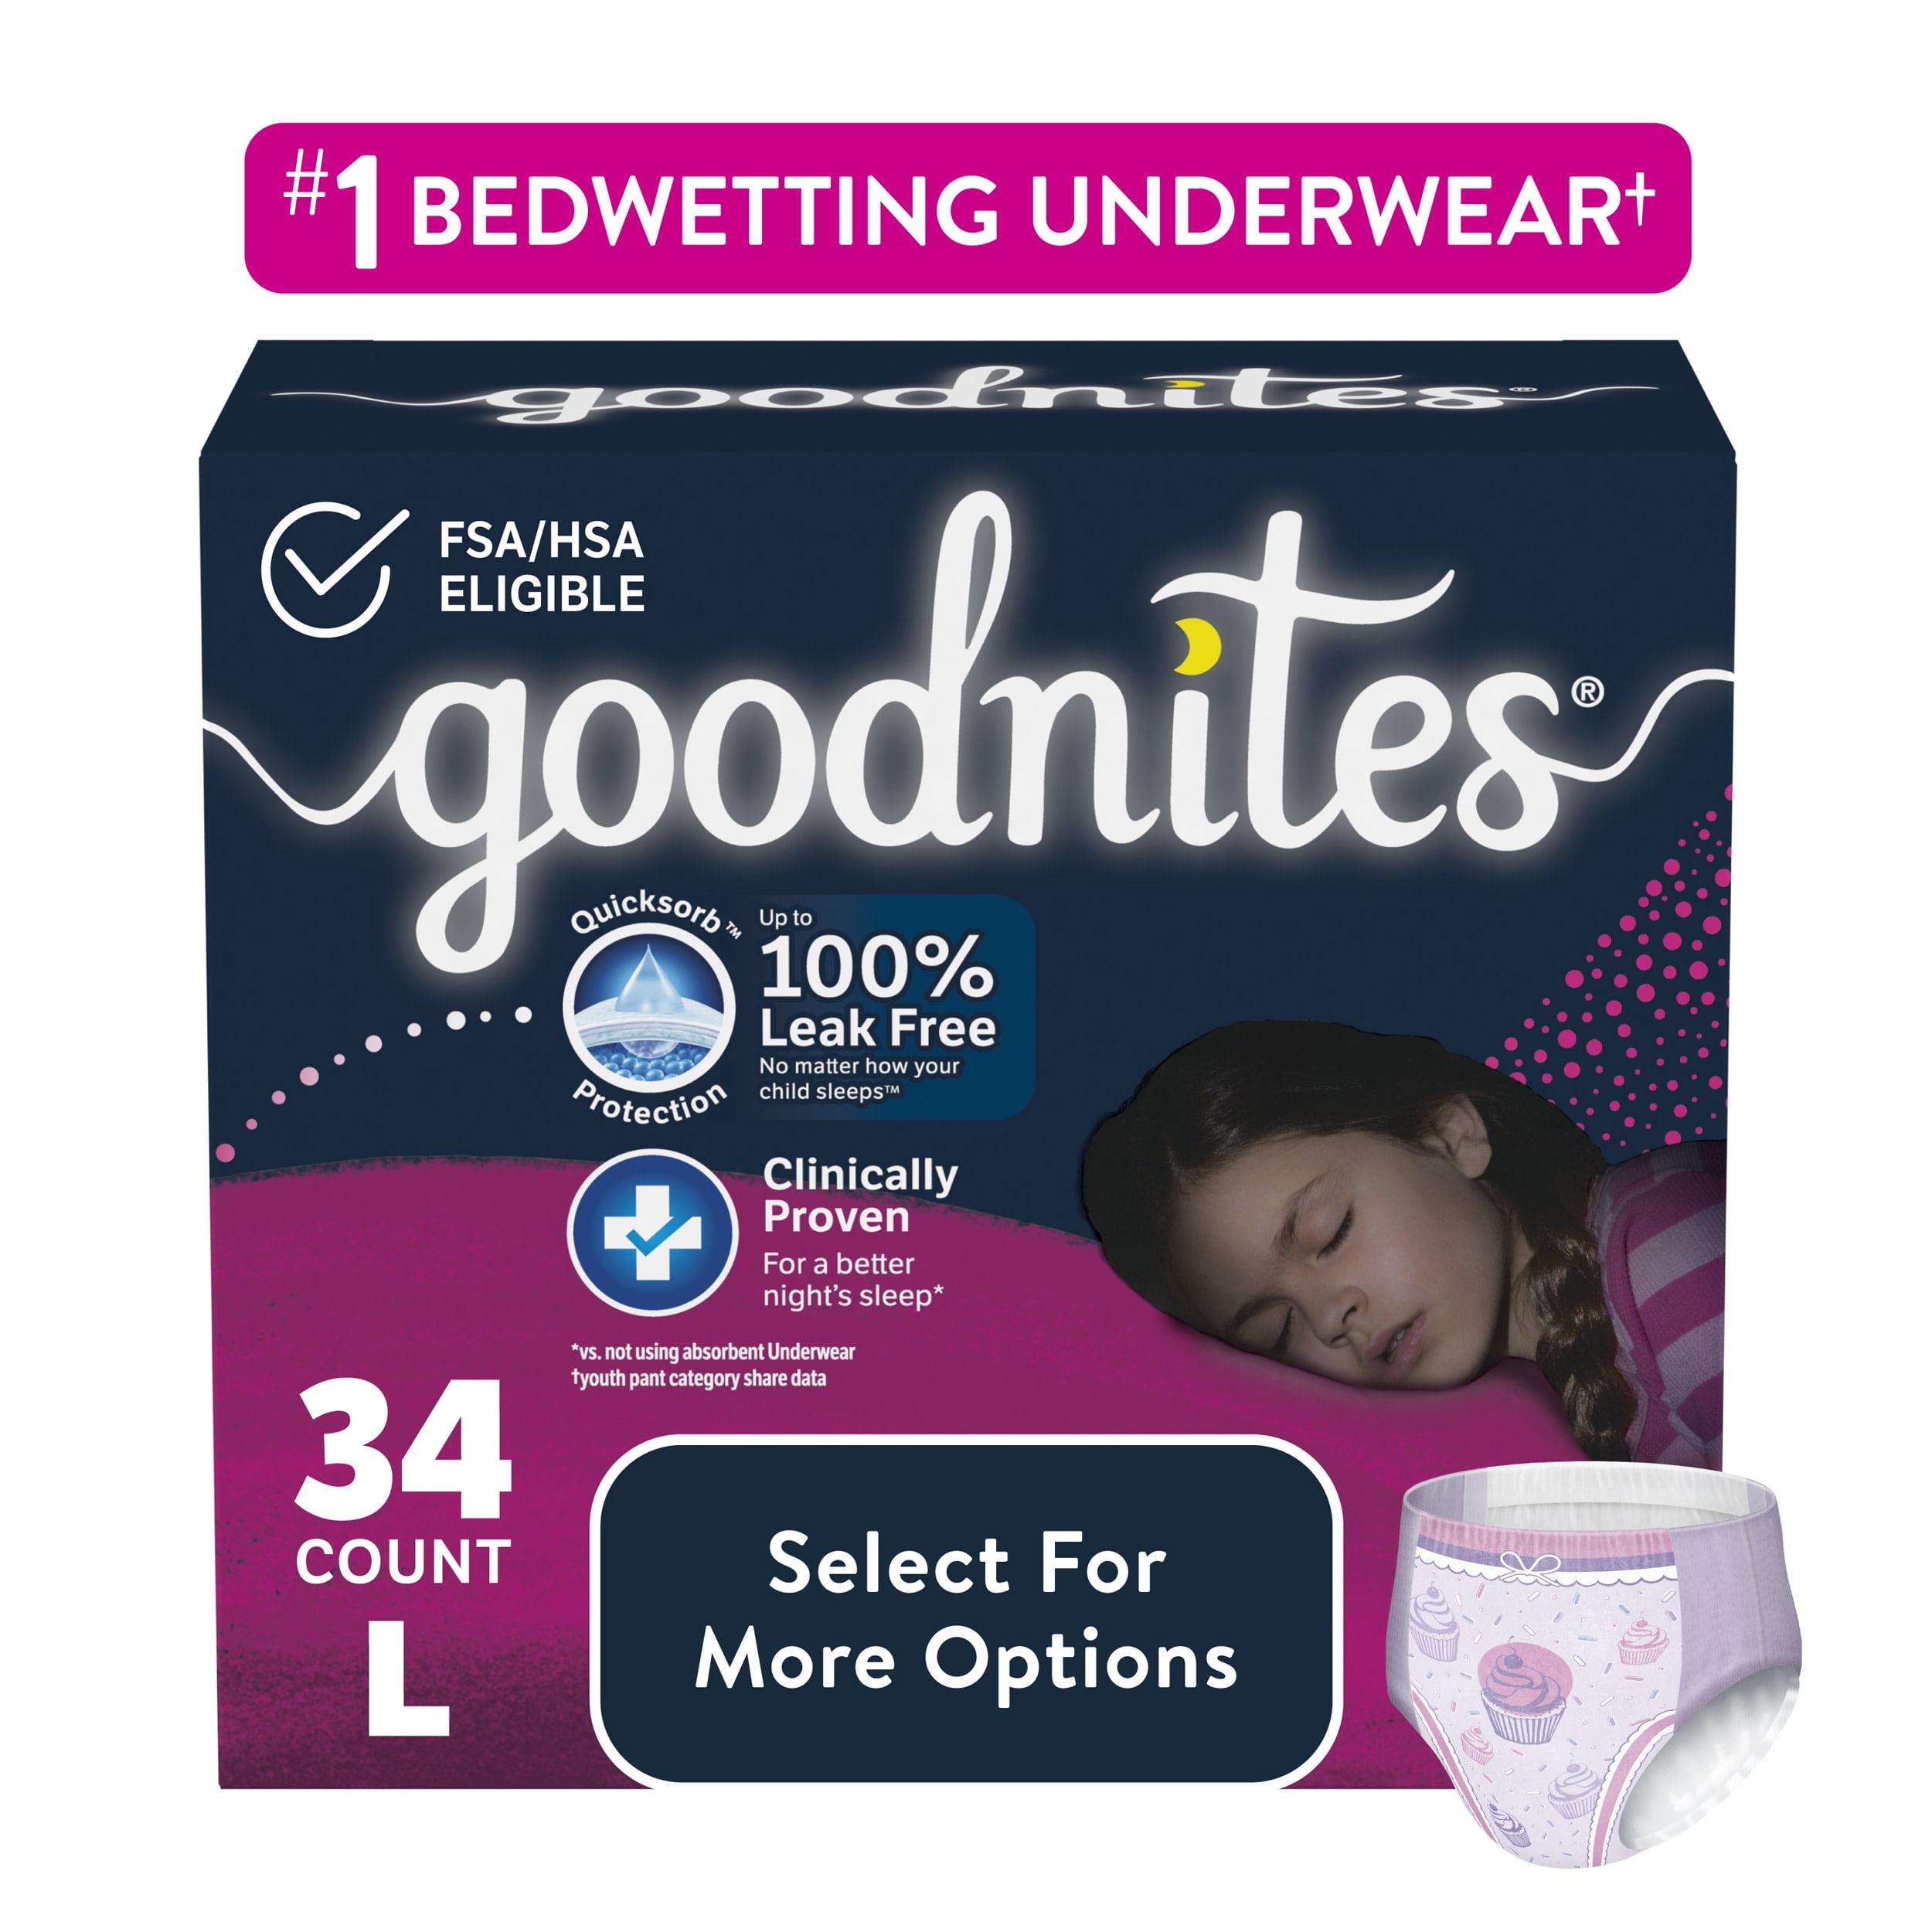 Goodnites Overnight Underwear for Girls, XS, 99 Ct (Select for More  Options) 